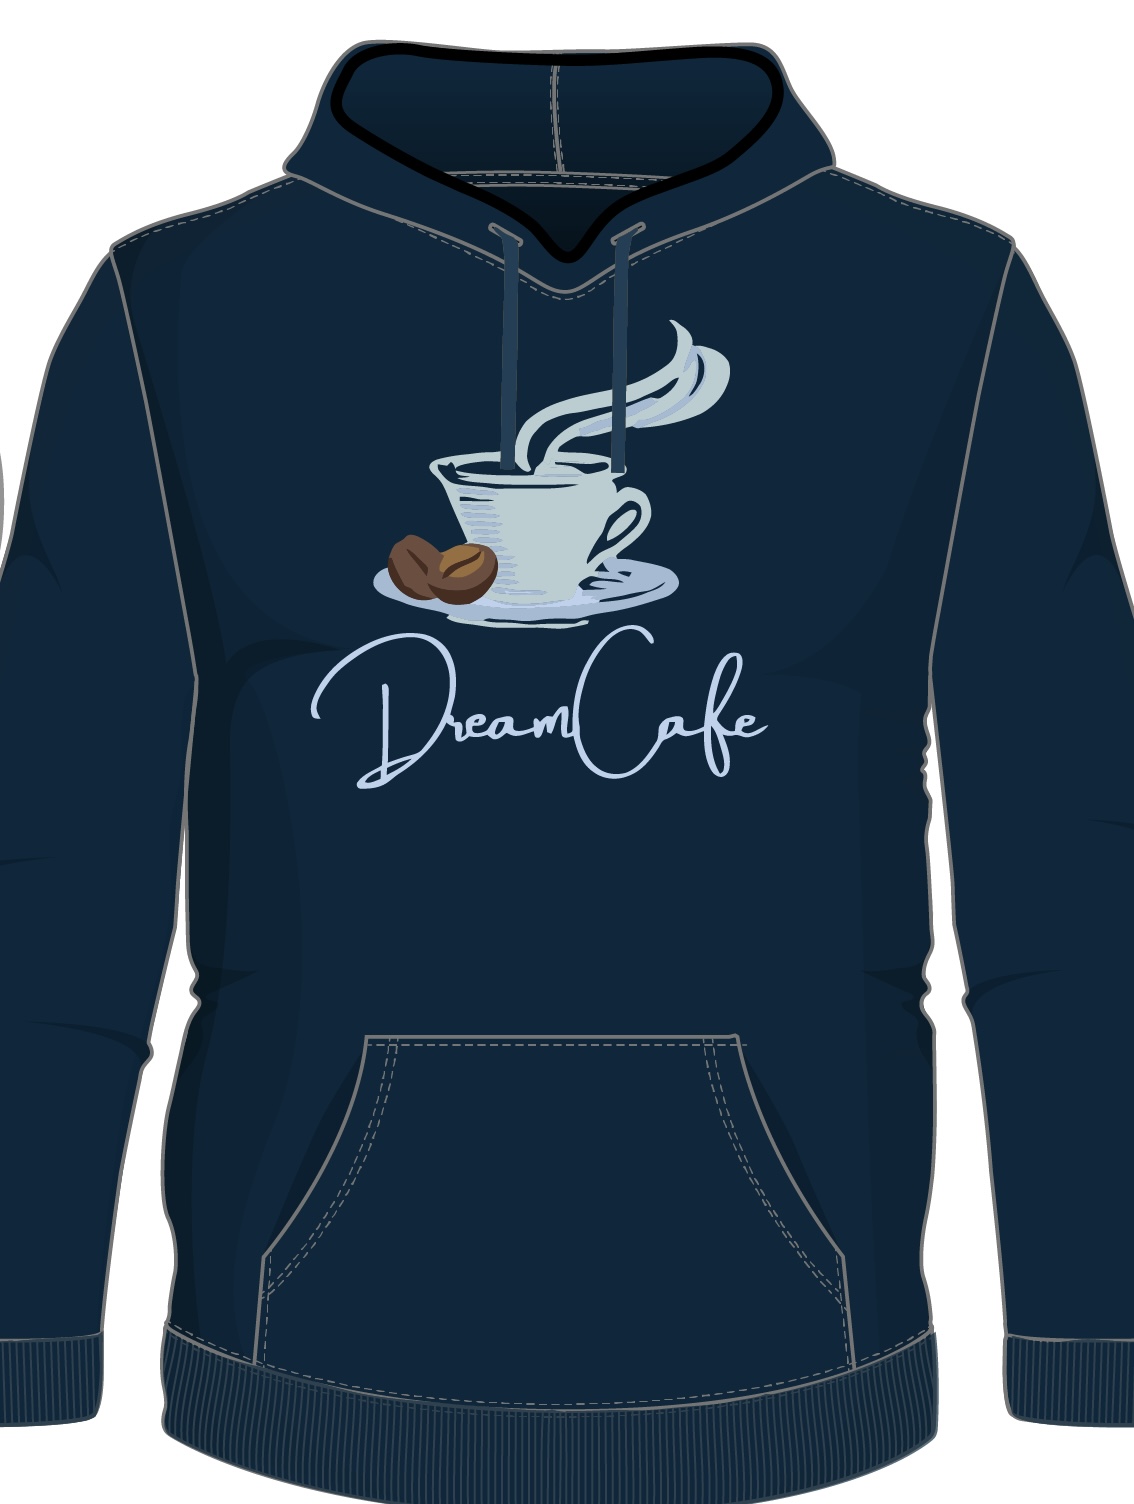 Pullover hooded sweatshirts are for sale at the cafe